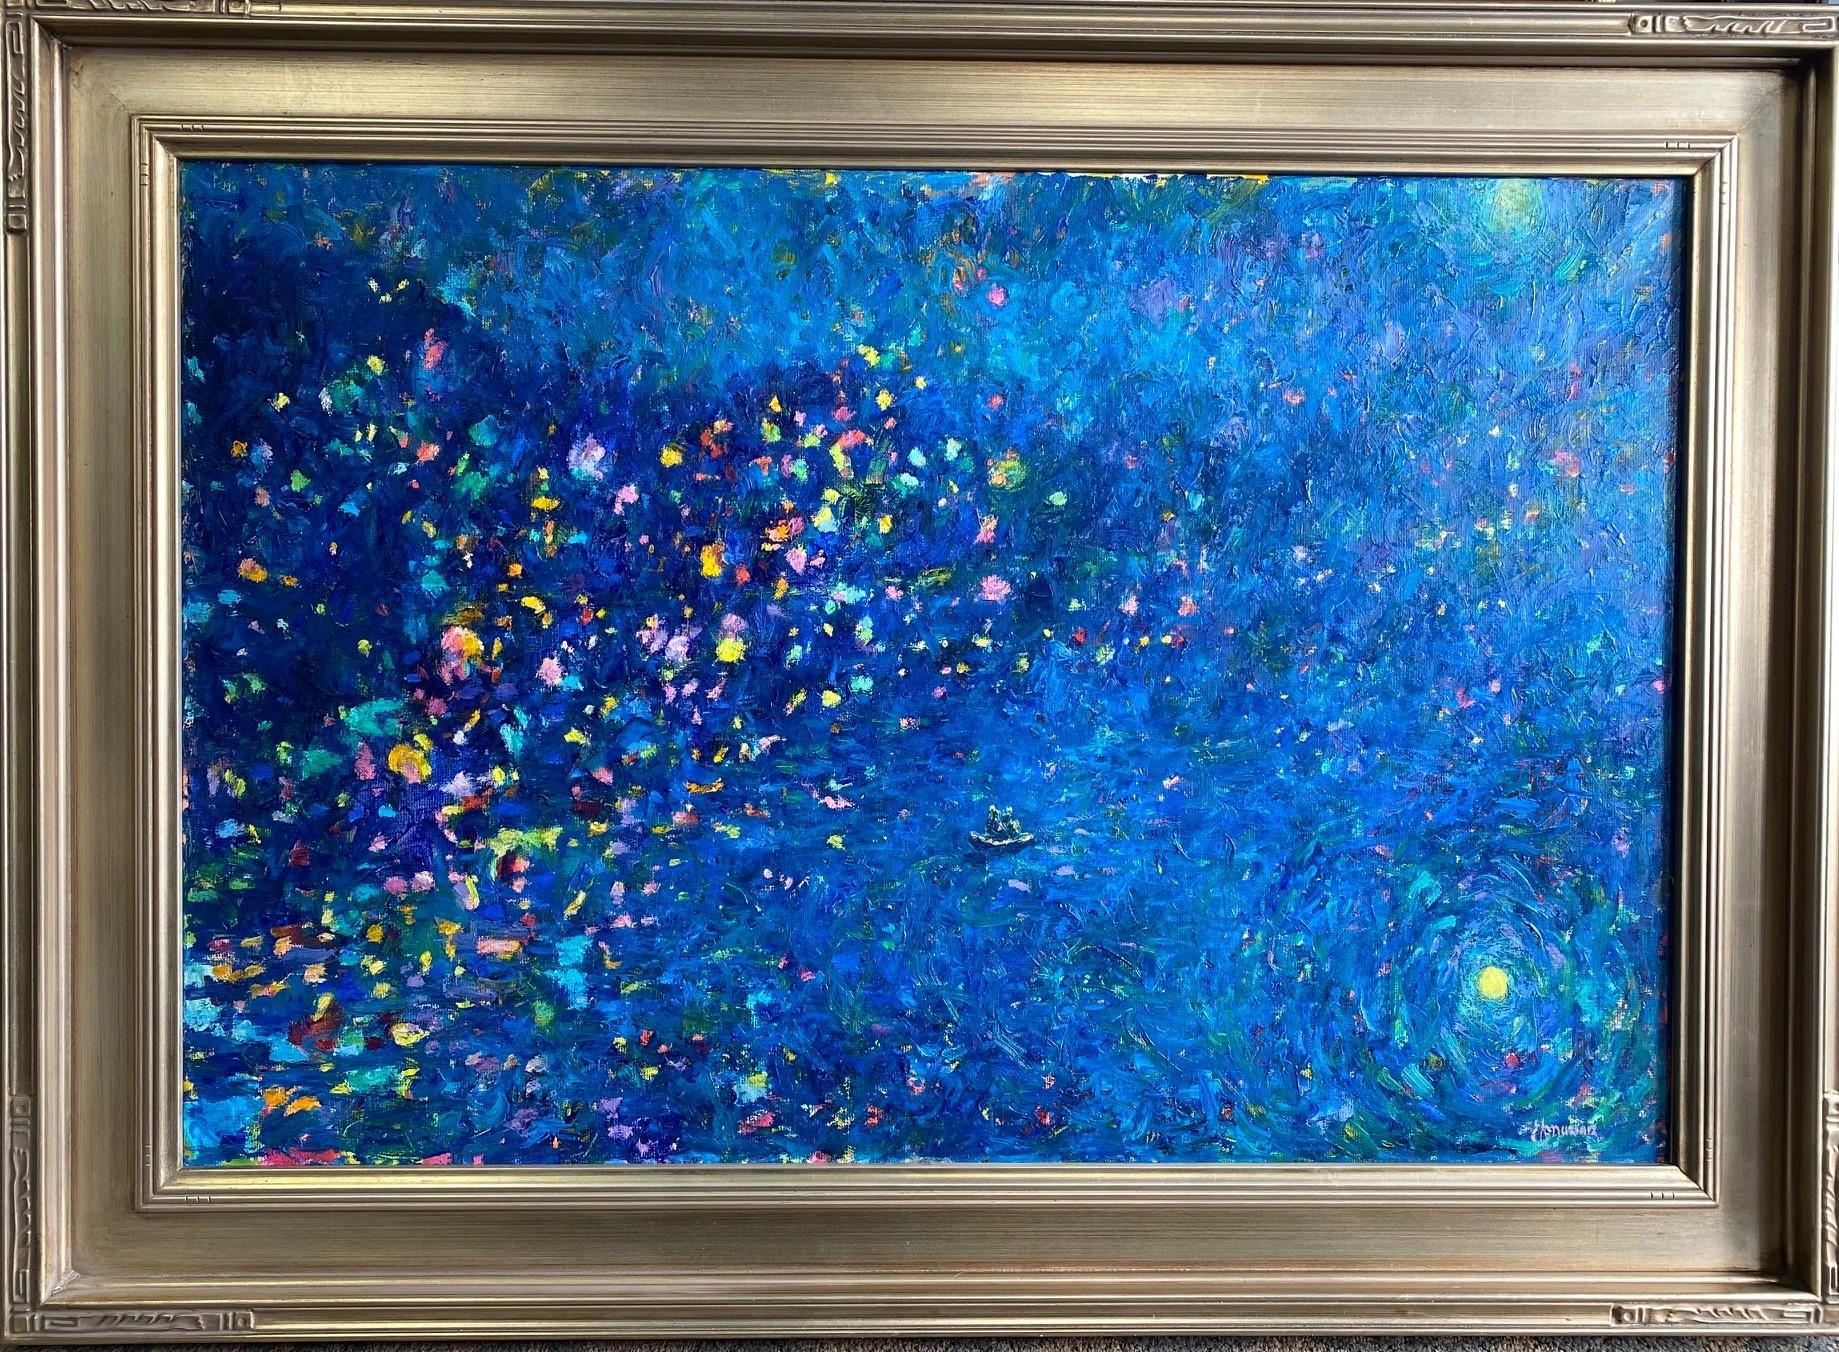 Dazzling in the Night, original 24x36 abstract expressionist landscape